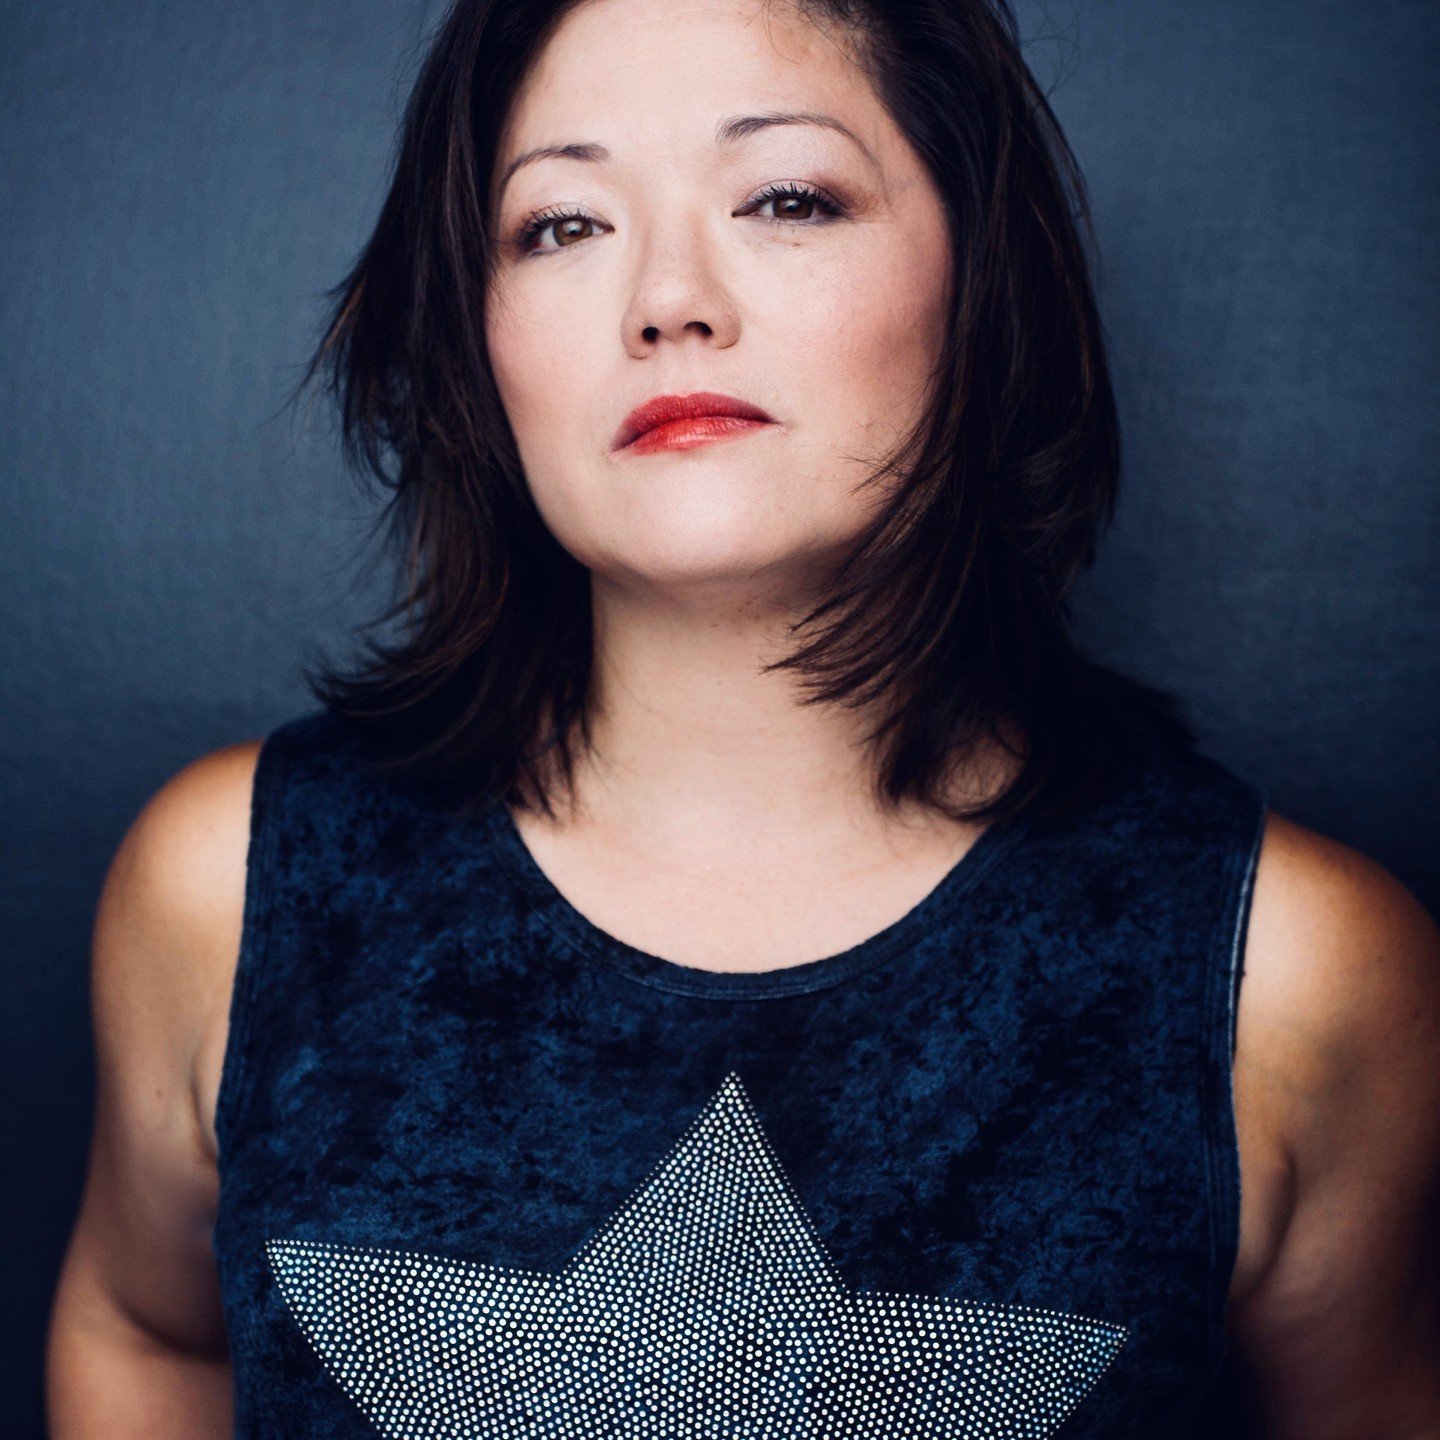 GET YOUR TICKETS to @panasianrep's 47th Art &amp; Action Benefit Dinner at @goldenunicornnyc! Tickets via our Linktr.ee in bio.

MEET OUR EMCEES
Erin Quill, Actor @erinquill 

Erin Quill is a dual citizen of Australia and the USA. She holds a BFA fro